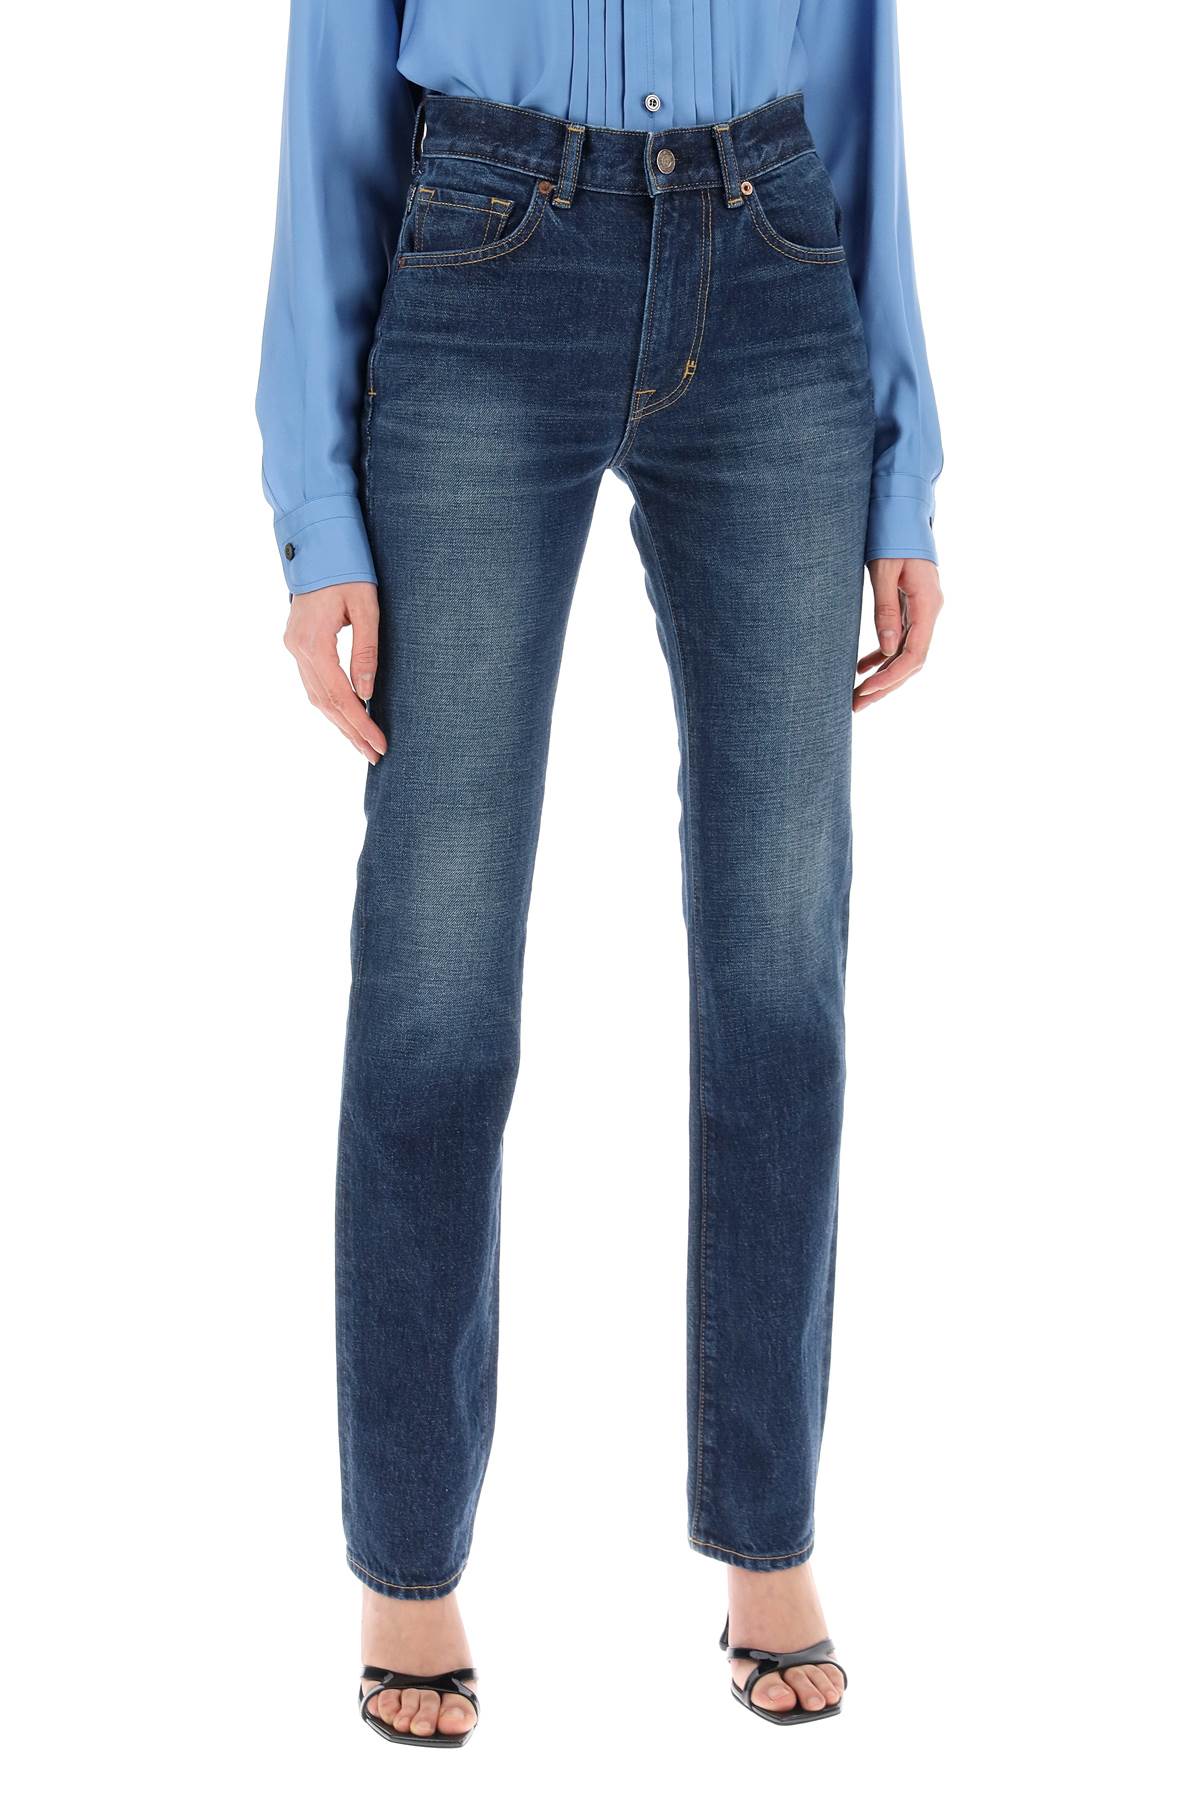 Tom Ford "Jeans With Stone Wash Treatment Women